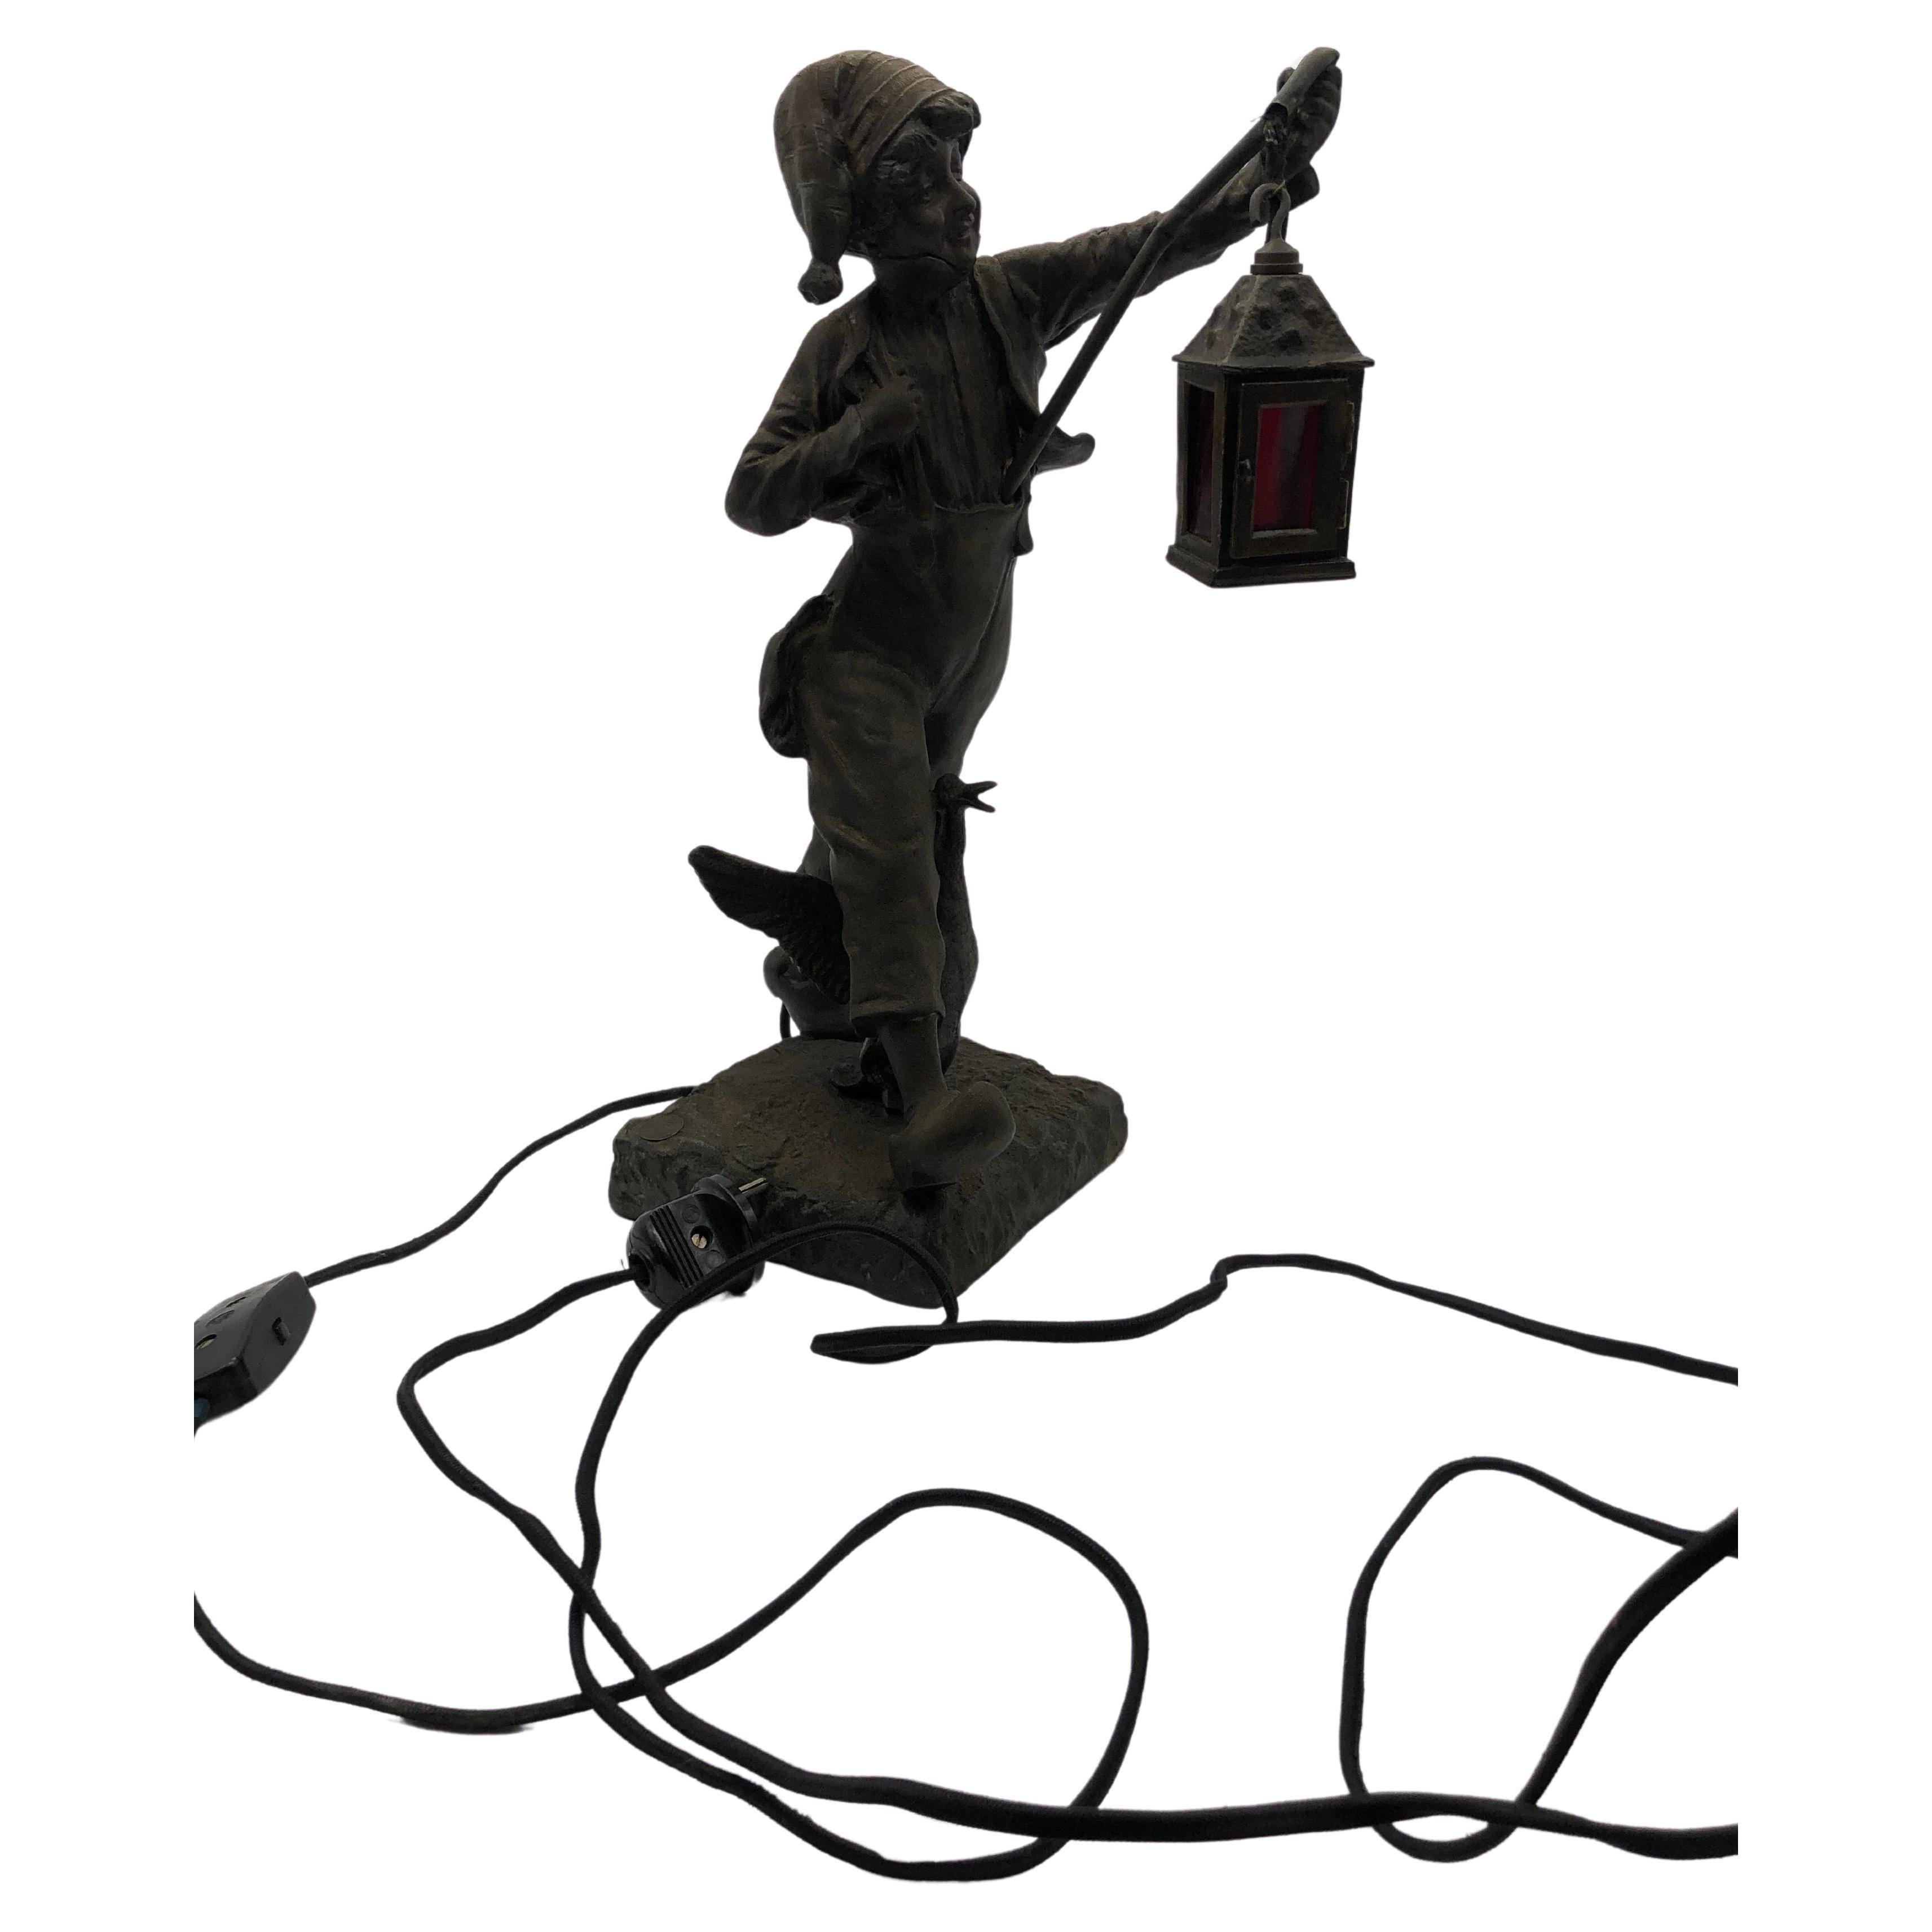 Behold the enchanting beauty of a majestic metallic figurine/lamp, exuding the allure of aged bronze(Optik). This exquisite piece depicts a young lad, clad in evening slumber attire, accompanied by a lantern, strolling alongside a goose. Its